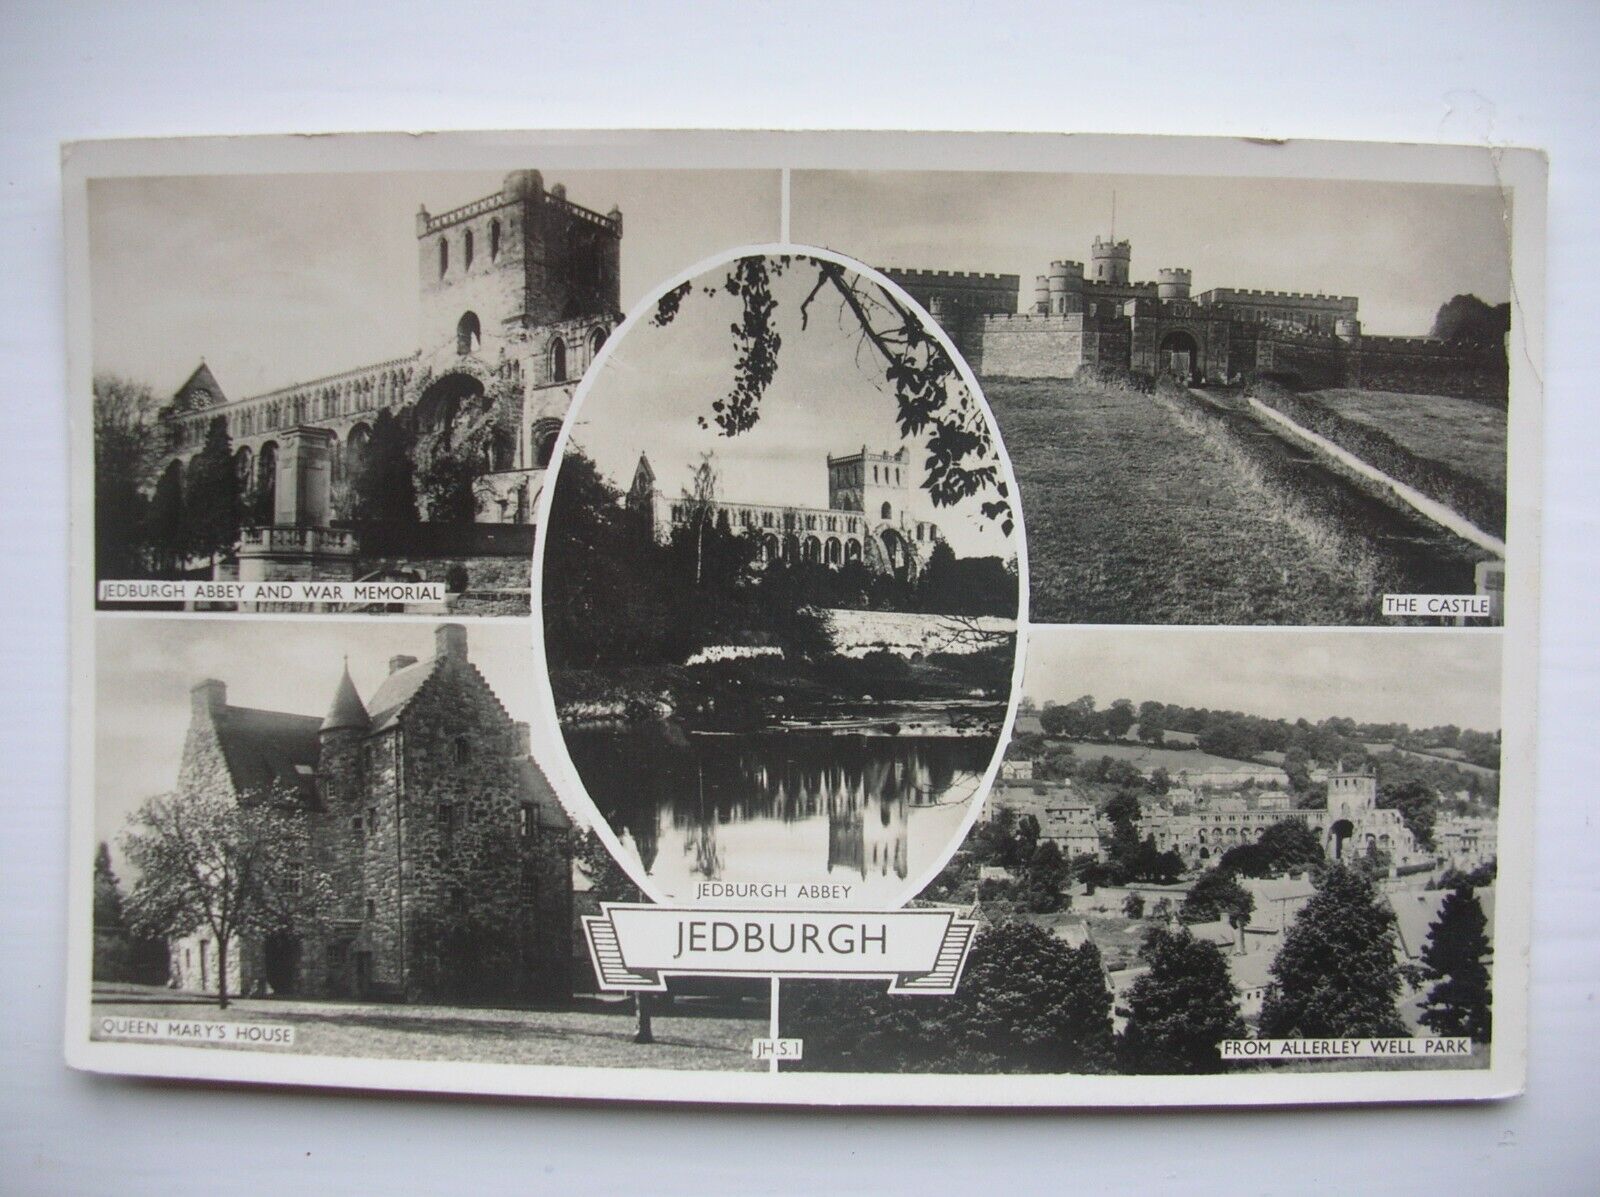 House Clearance - Jedburgh – Queen Mary’s House, Abbey, Castle etc. (Lilywhite - 1959)